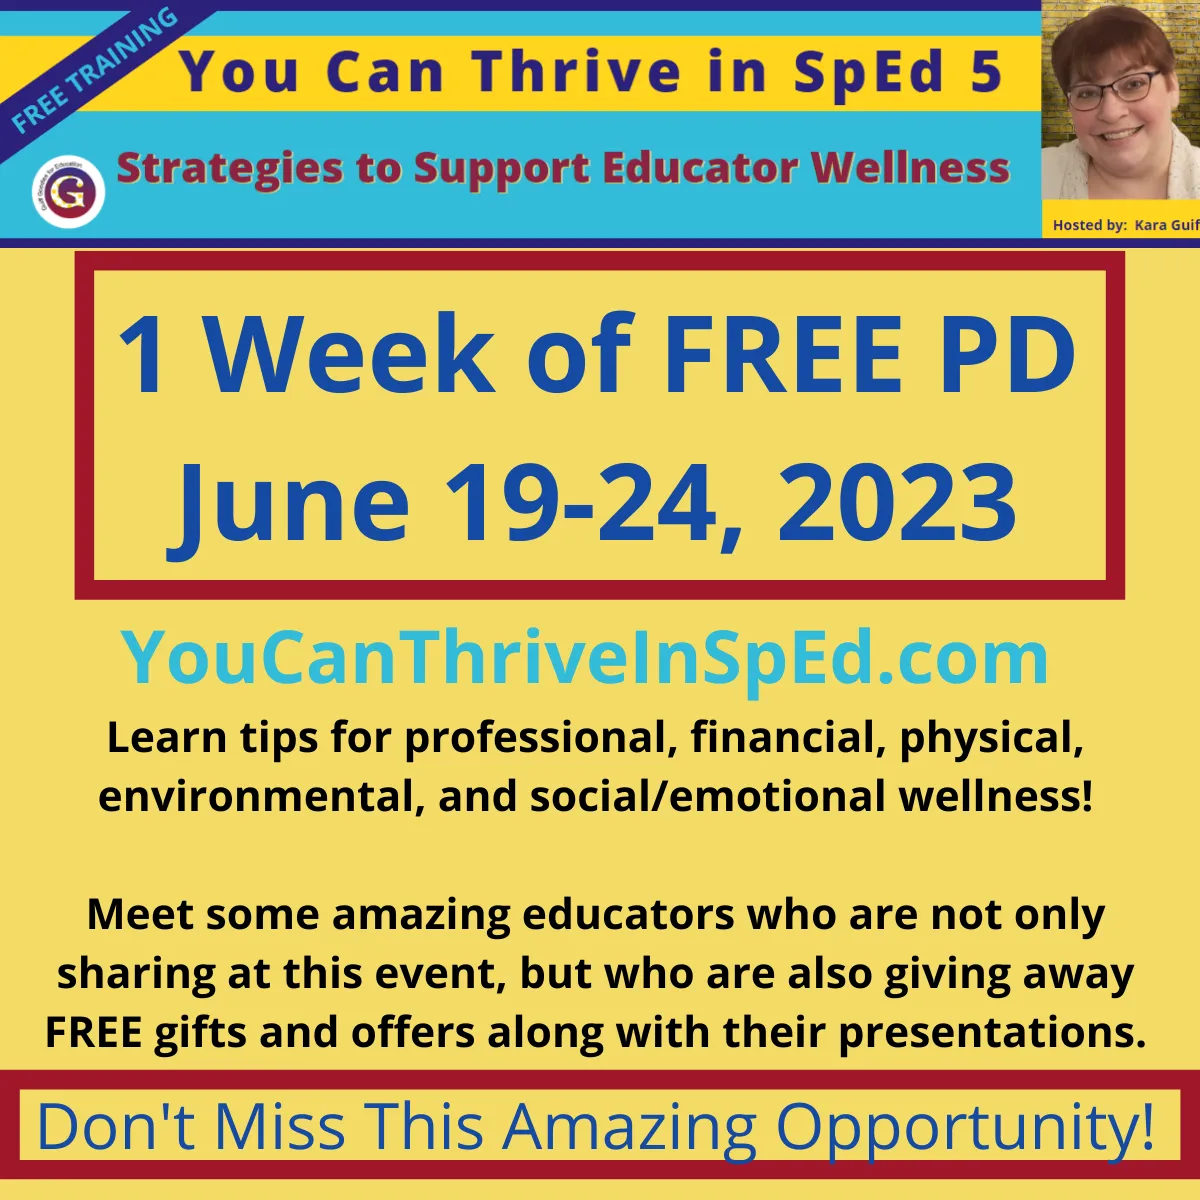 Free one week of training: June 19-24. You Can Thrive in SpEd (Strategies to Support Educator Wellness) Click for more information.